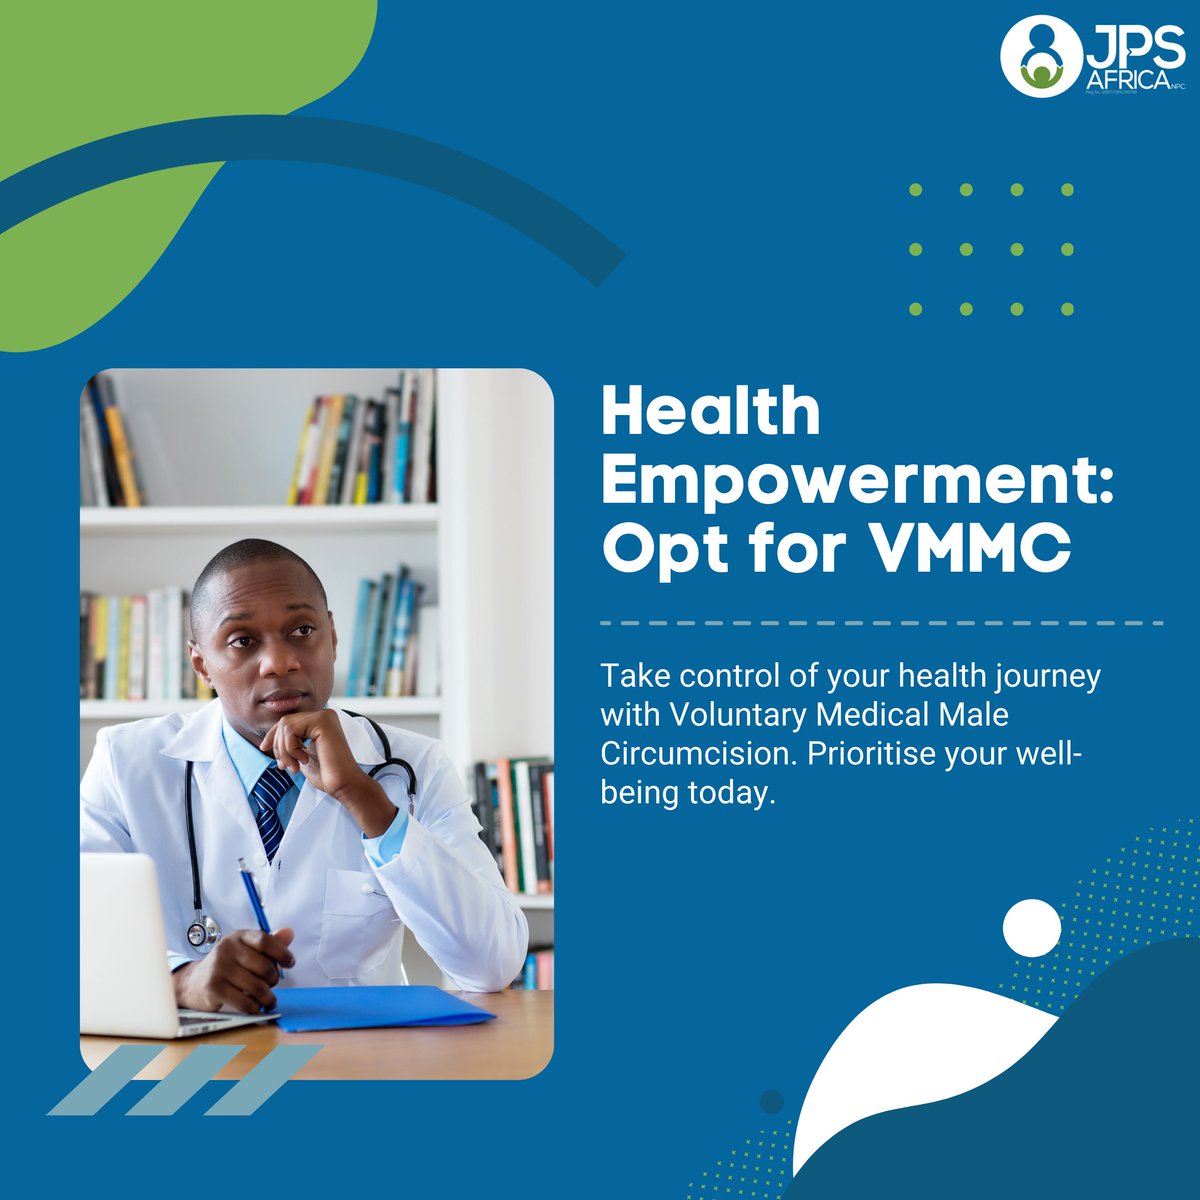 Choosing Voluntary Medical Male Circumcision (VMMC) unlocks a healthier you by reducing the risk of certain infections and diseases. It promotes better hygiene and lowers the likelihood of transmission of sexually transmitted infections.  #HealthEmpowerment #VMMC #Wellness  🩺✨